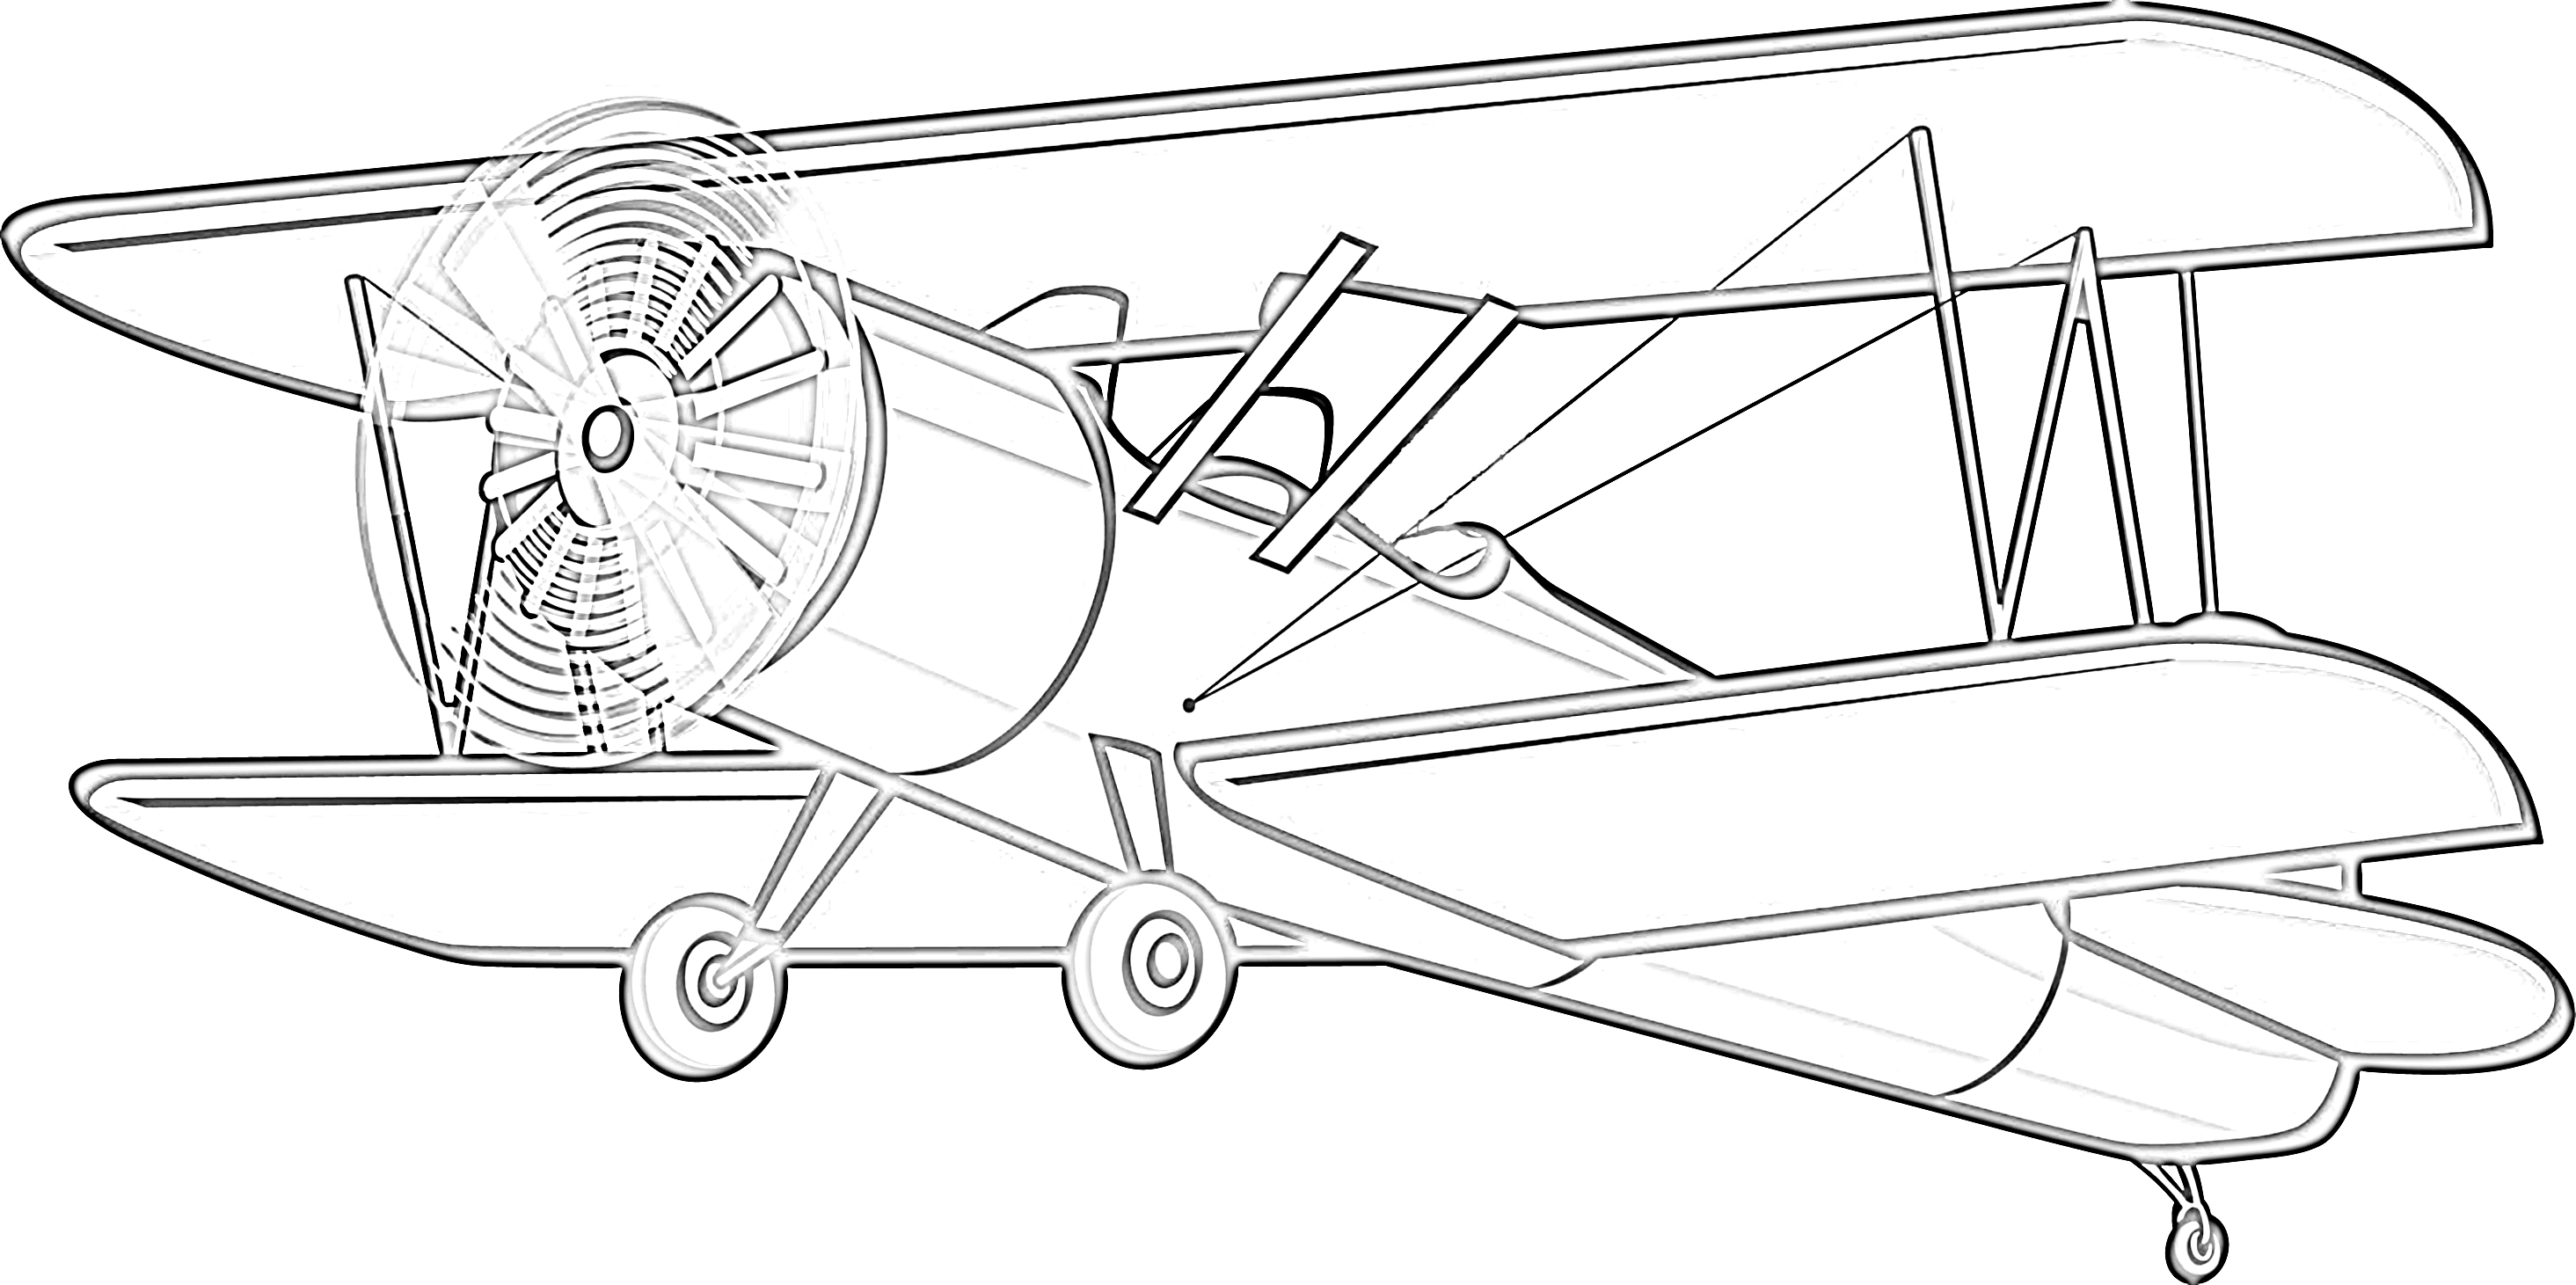 Classic airplane coloring page